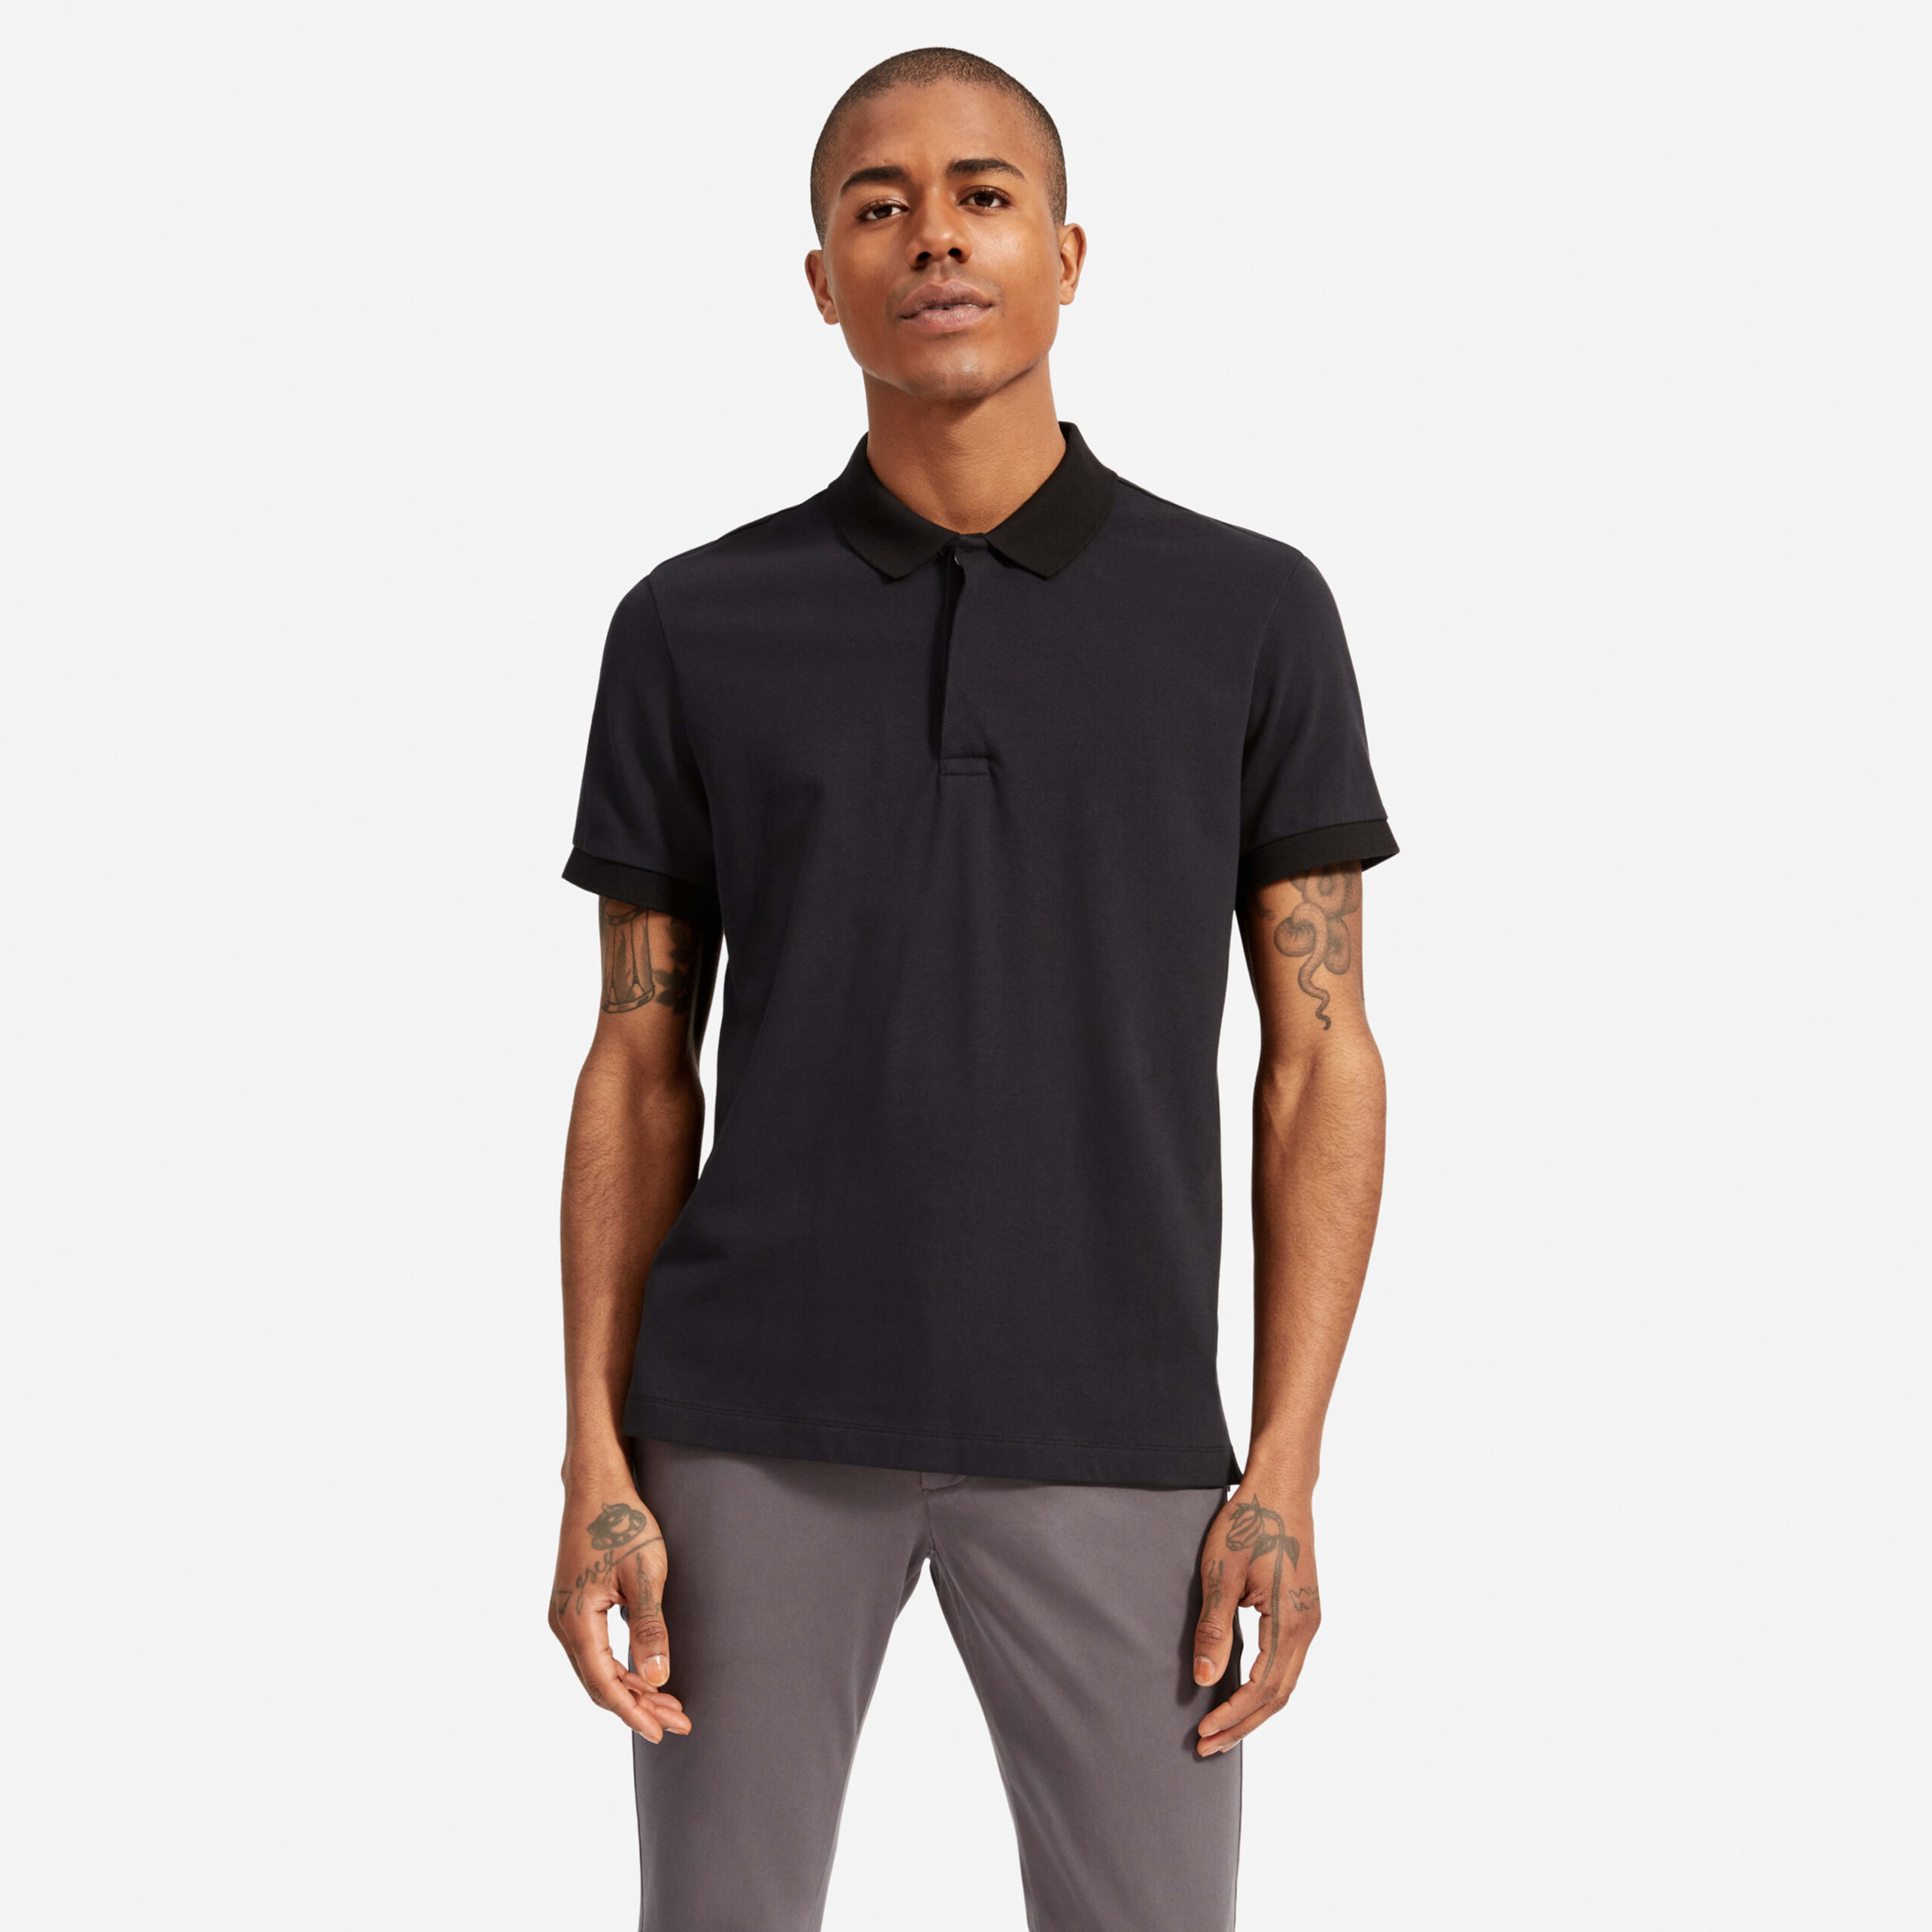 Men&#8217;s Performance Polo T-Shirt by Everlane in Black